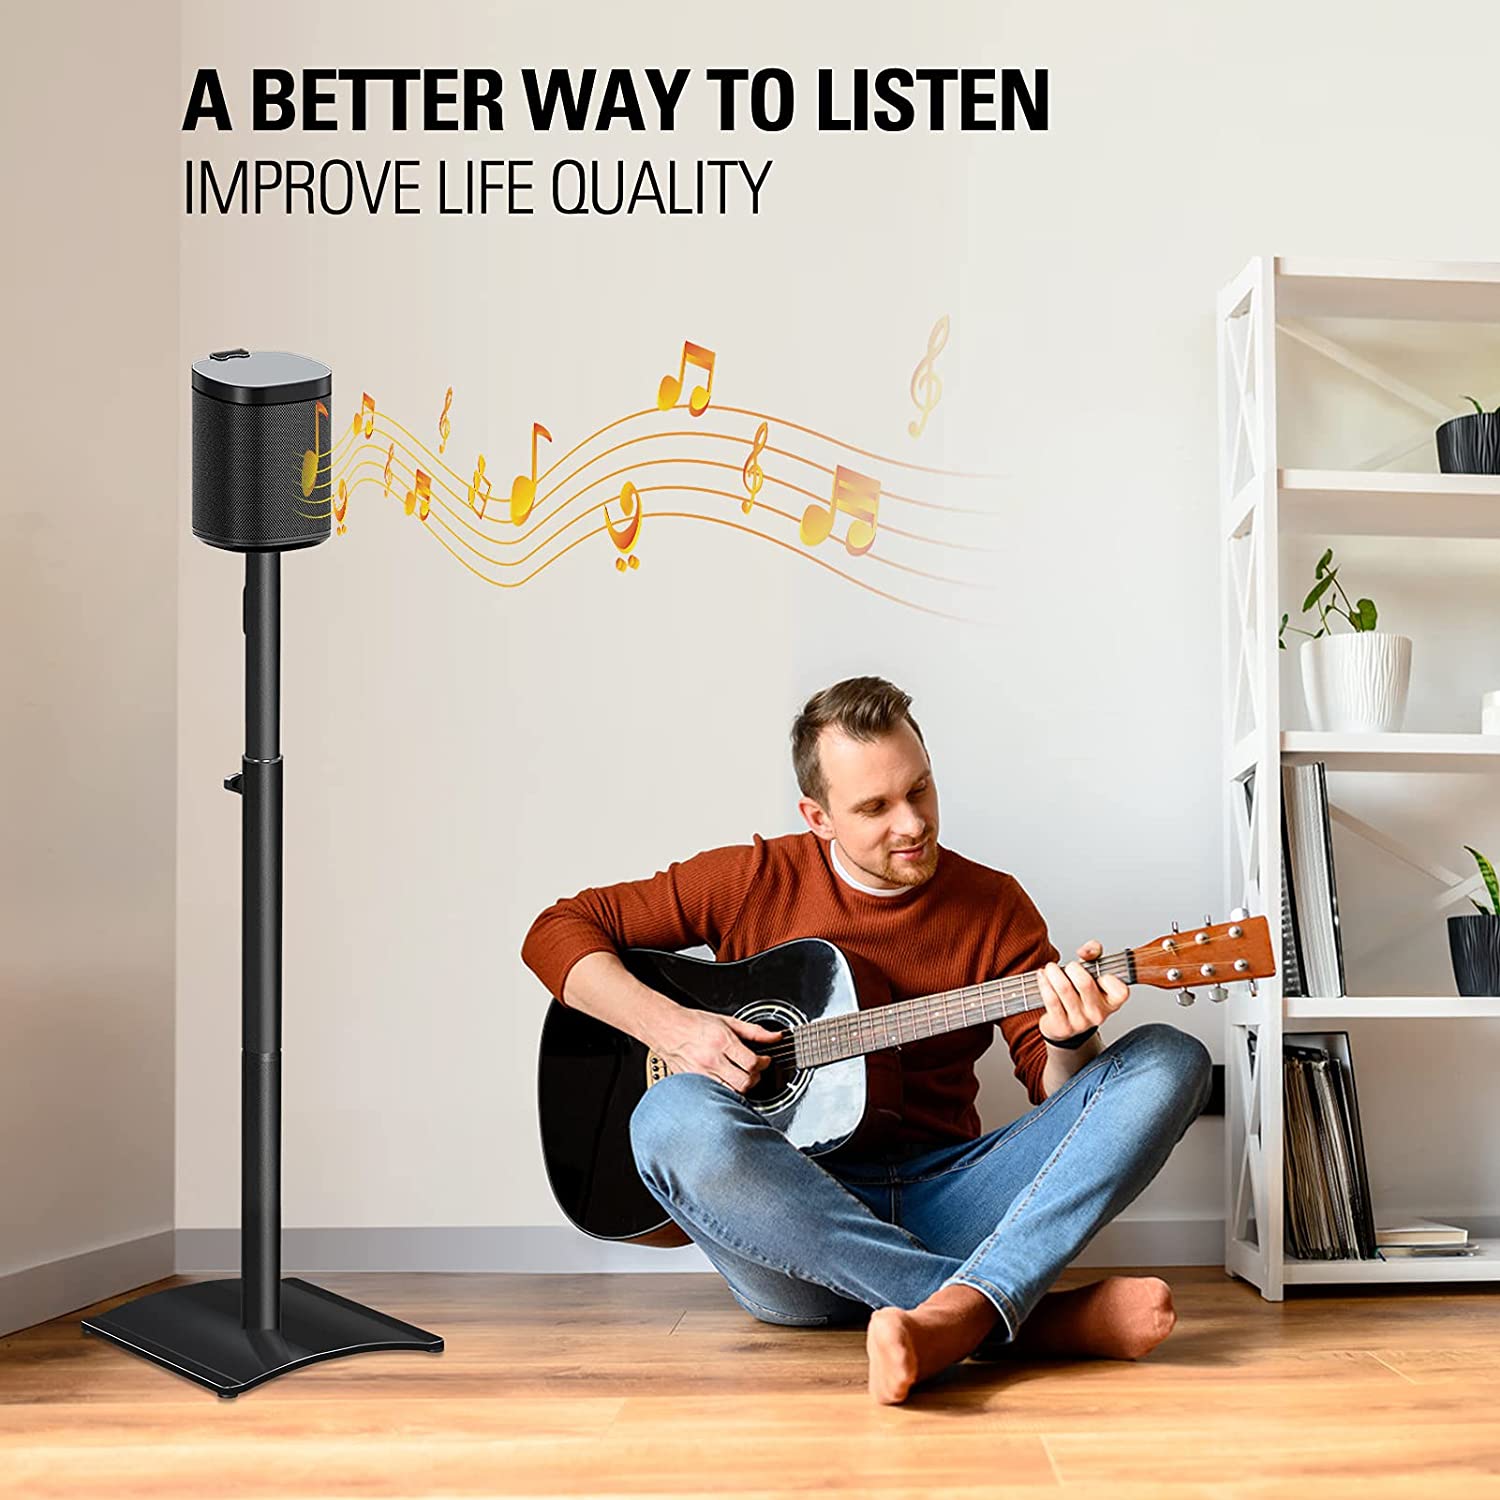 1 speakers stands allow a better way to listen